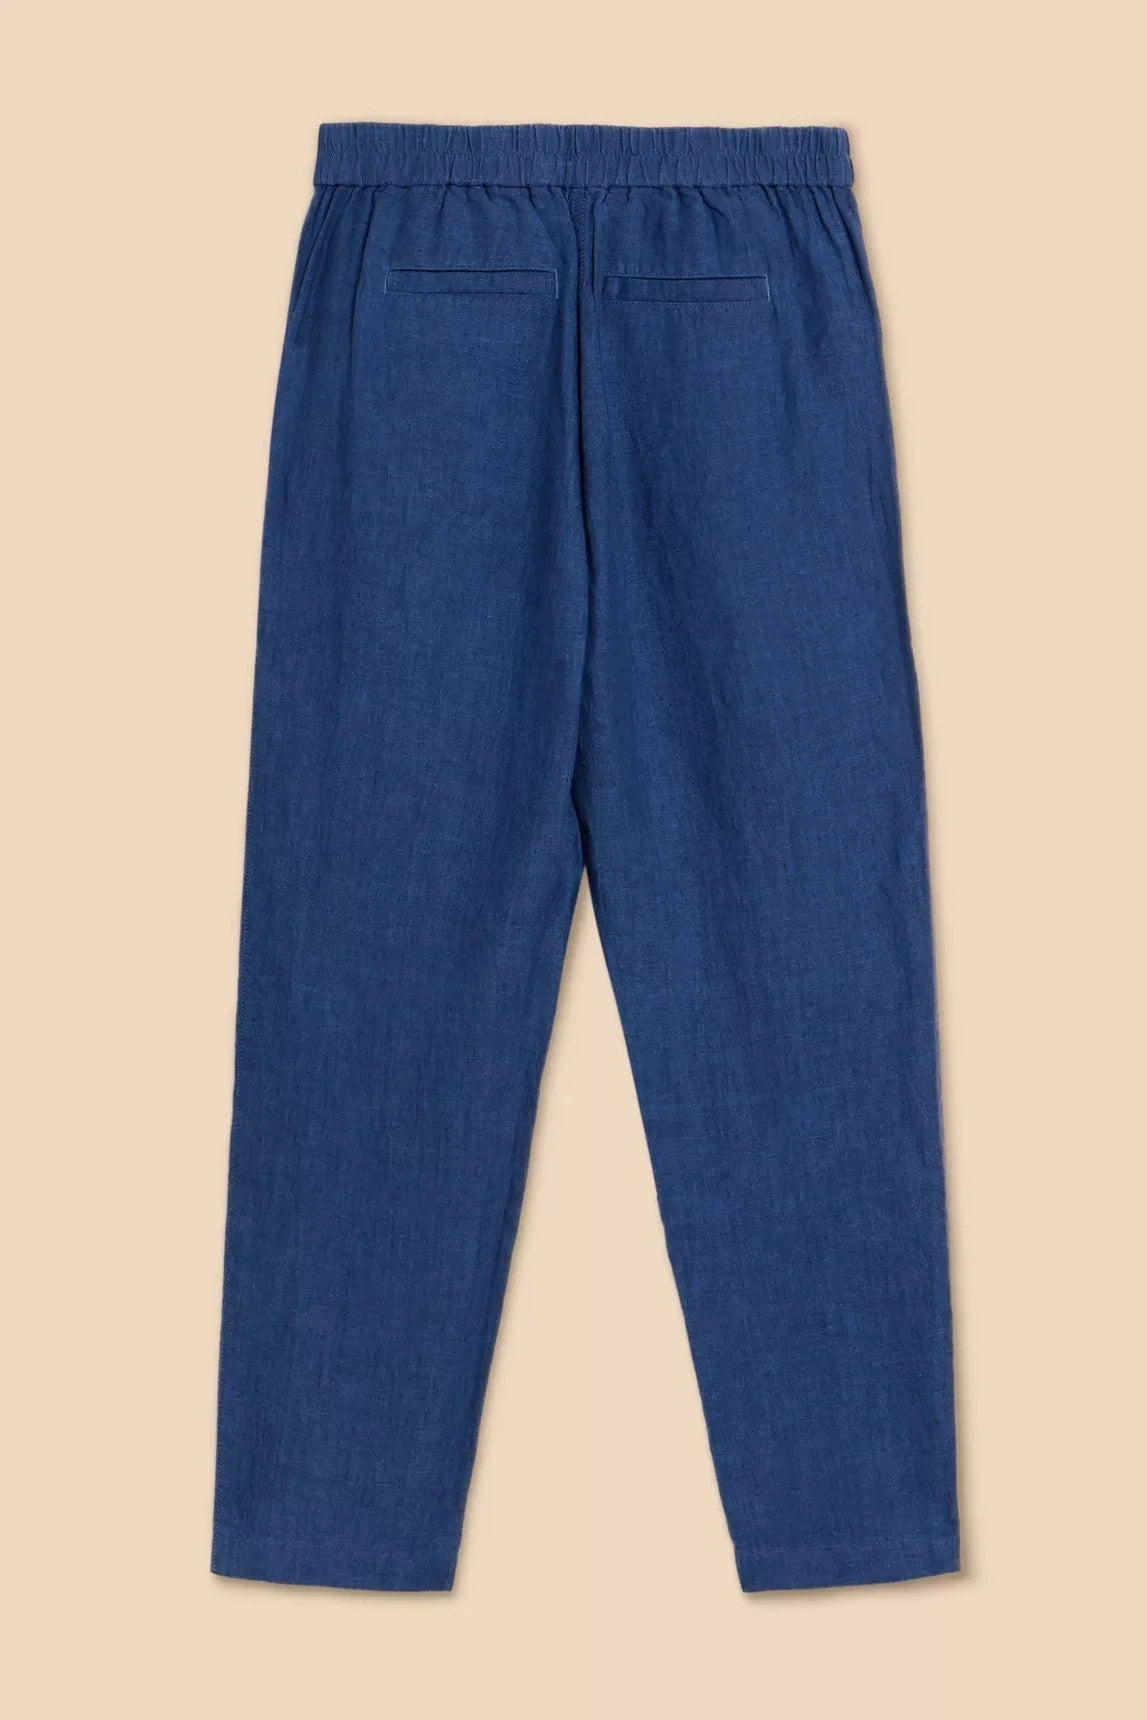 White Stuff Rowena Linen Trouser in Dark Navy-Womens-Ohh! By Gum - Shop Sustainable